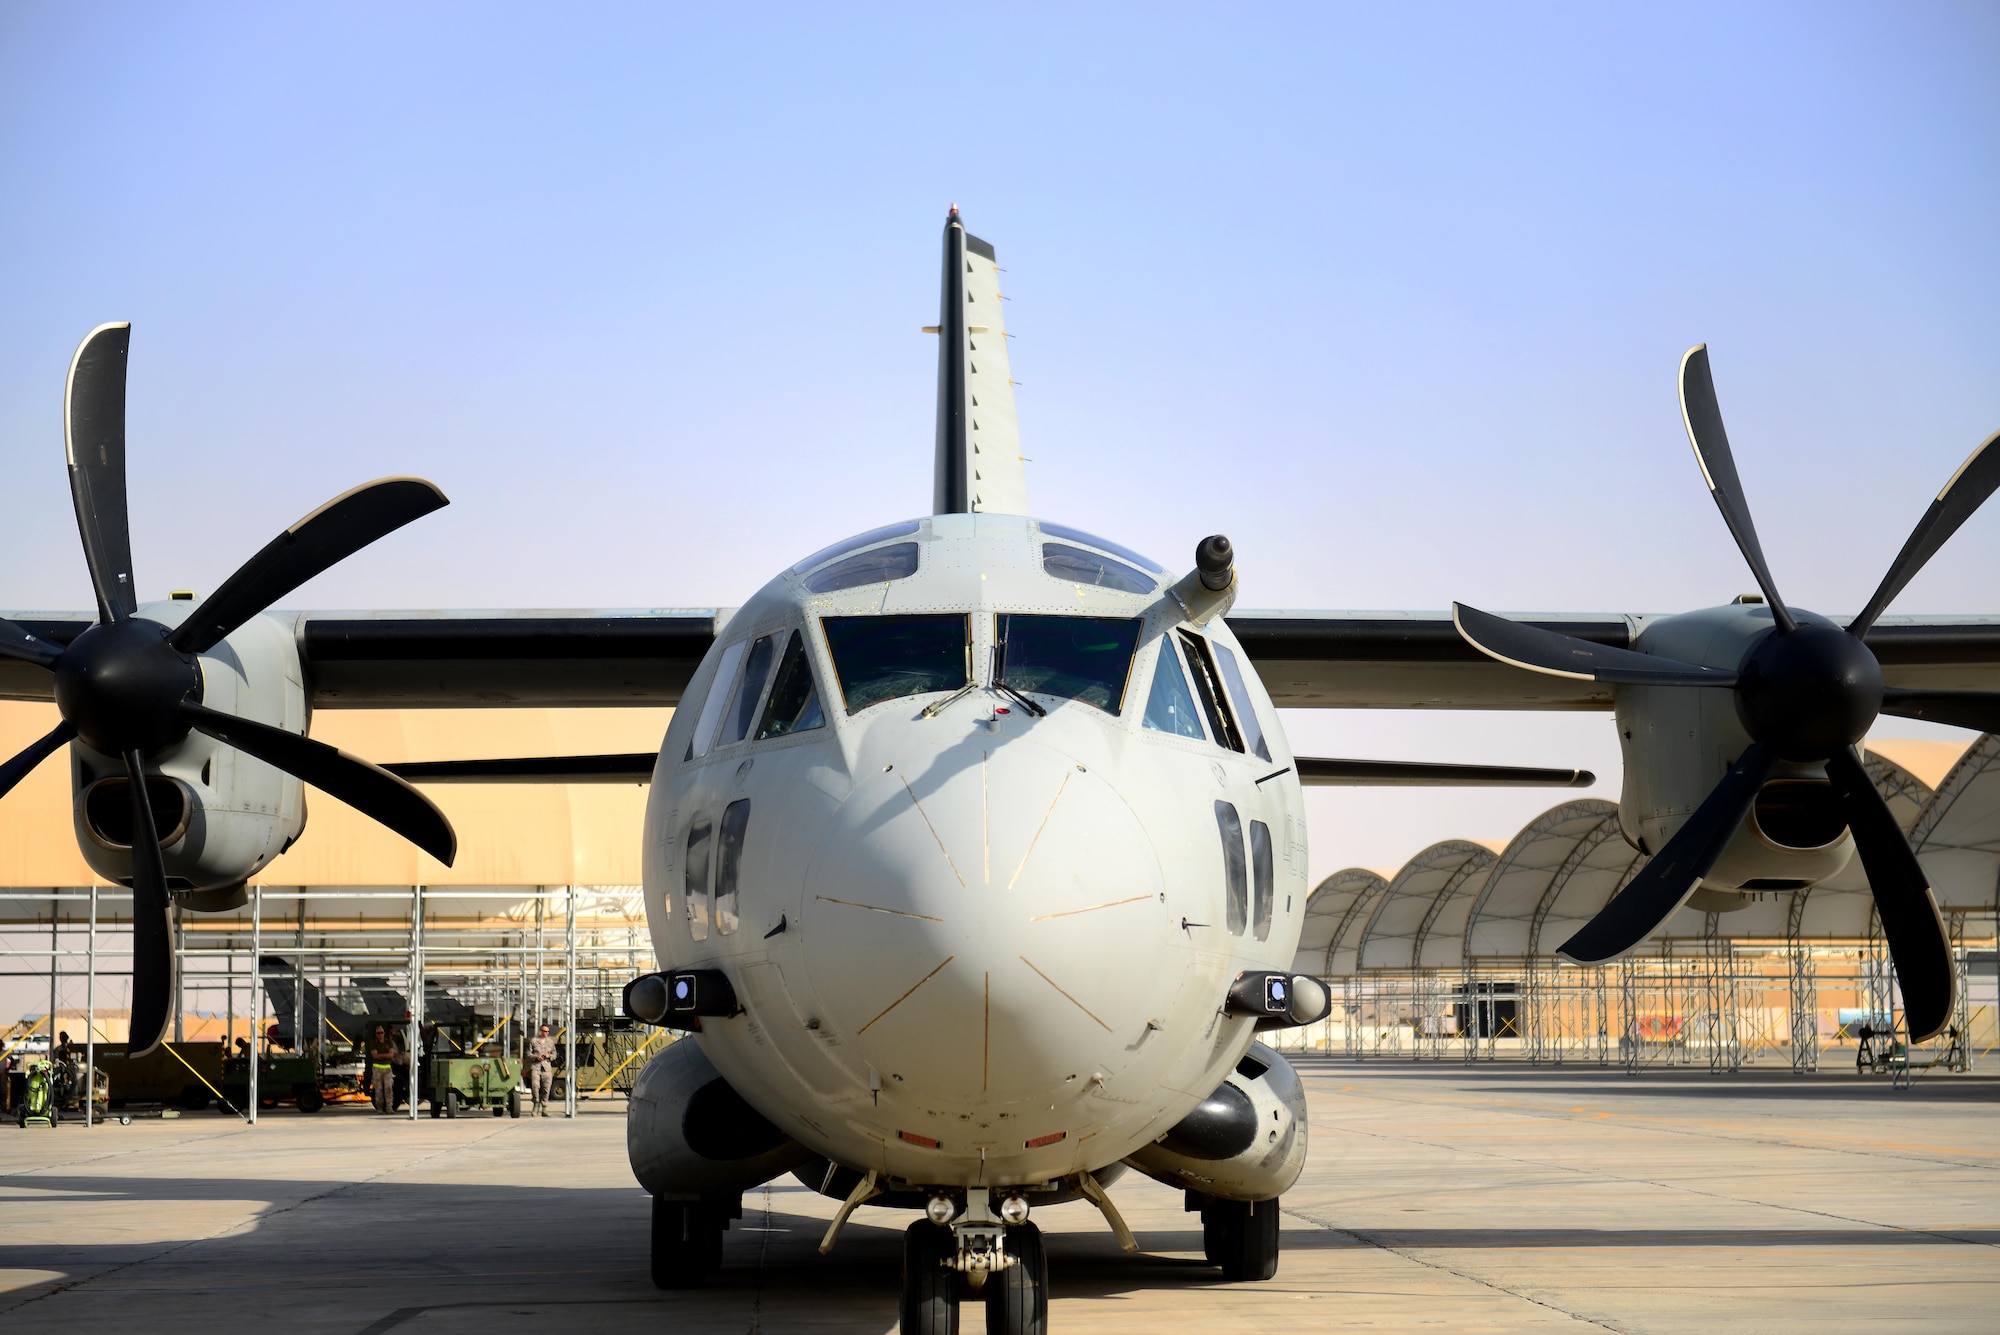 An Italian Air Force (ITAF) C-27 aircraft comes to a halt after landing during a simulated in-flight emergency in Southwest Asia on July 2, 2017. The 407th Air Expeditionary Group fire department responded to the call of a distressed aircraft and assisted in the removal of injured crew members during the simulated in-flight emergency scenario. 407th AEG fire department are first responders to any and all incidents dealing with U.S. and coalition aircraft. (U.S. Air Force photo by Tech Sgt. Andy M. Kin)